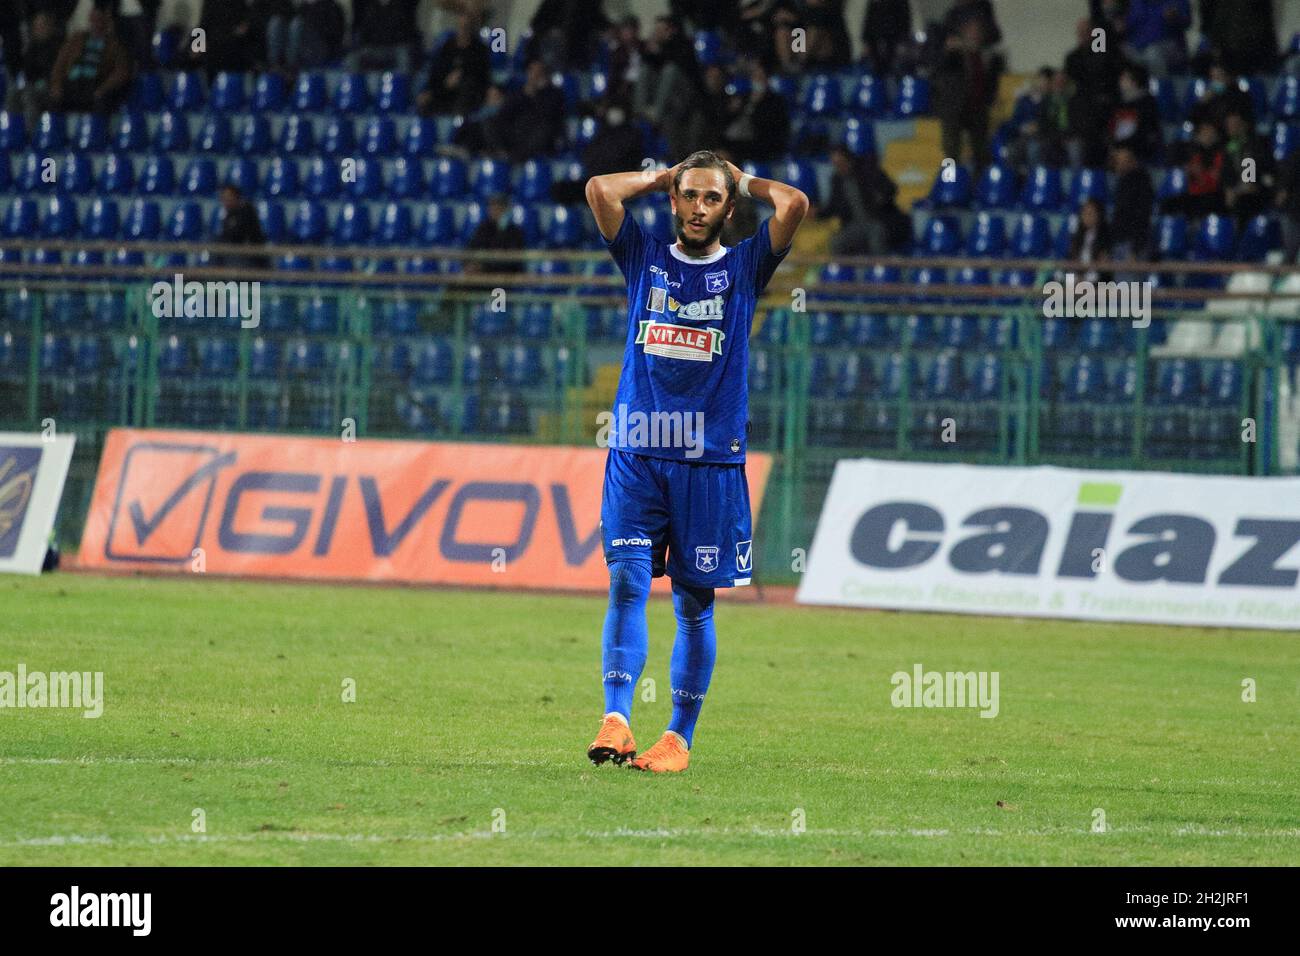 Giuseppe Guadagni (26) Paganese during the Italian Football Championship Serie C Girone C Lega Pro, tenth day of the first round Paganese vs Potenza. Paganese wins 2 - 0. (Photo by Pasquale Senatore/Pacific Press/Sipa USA) Stock Photo